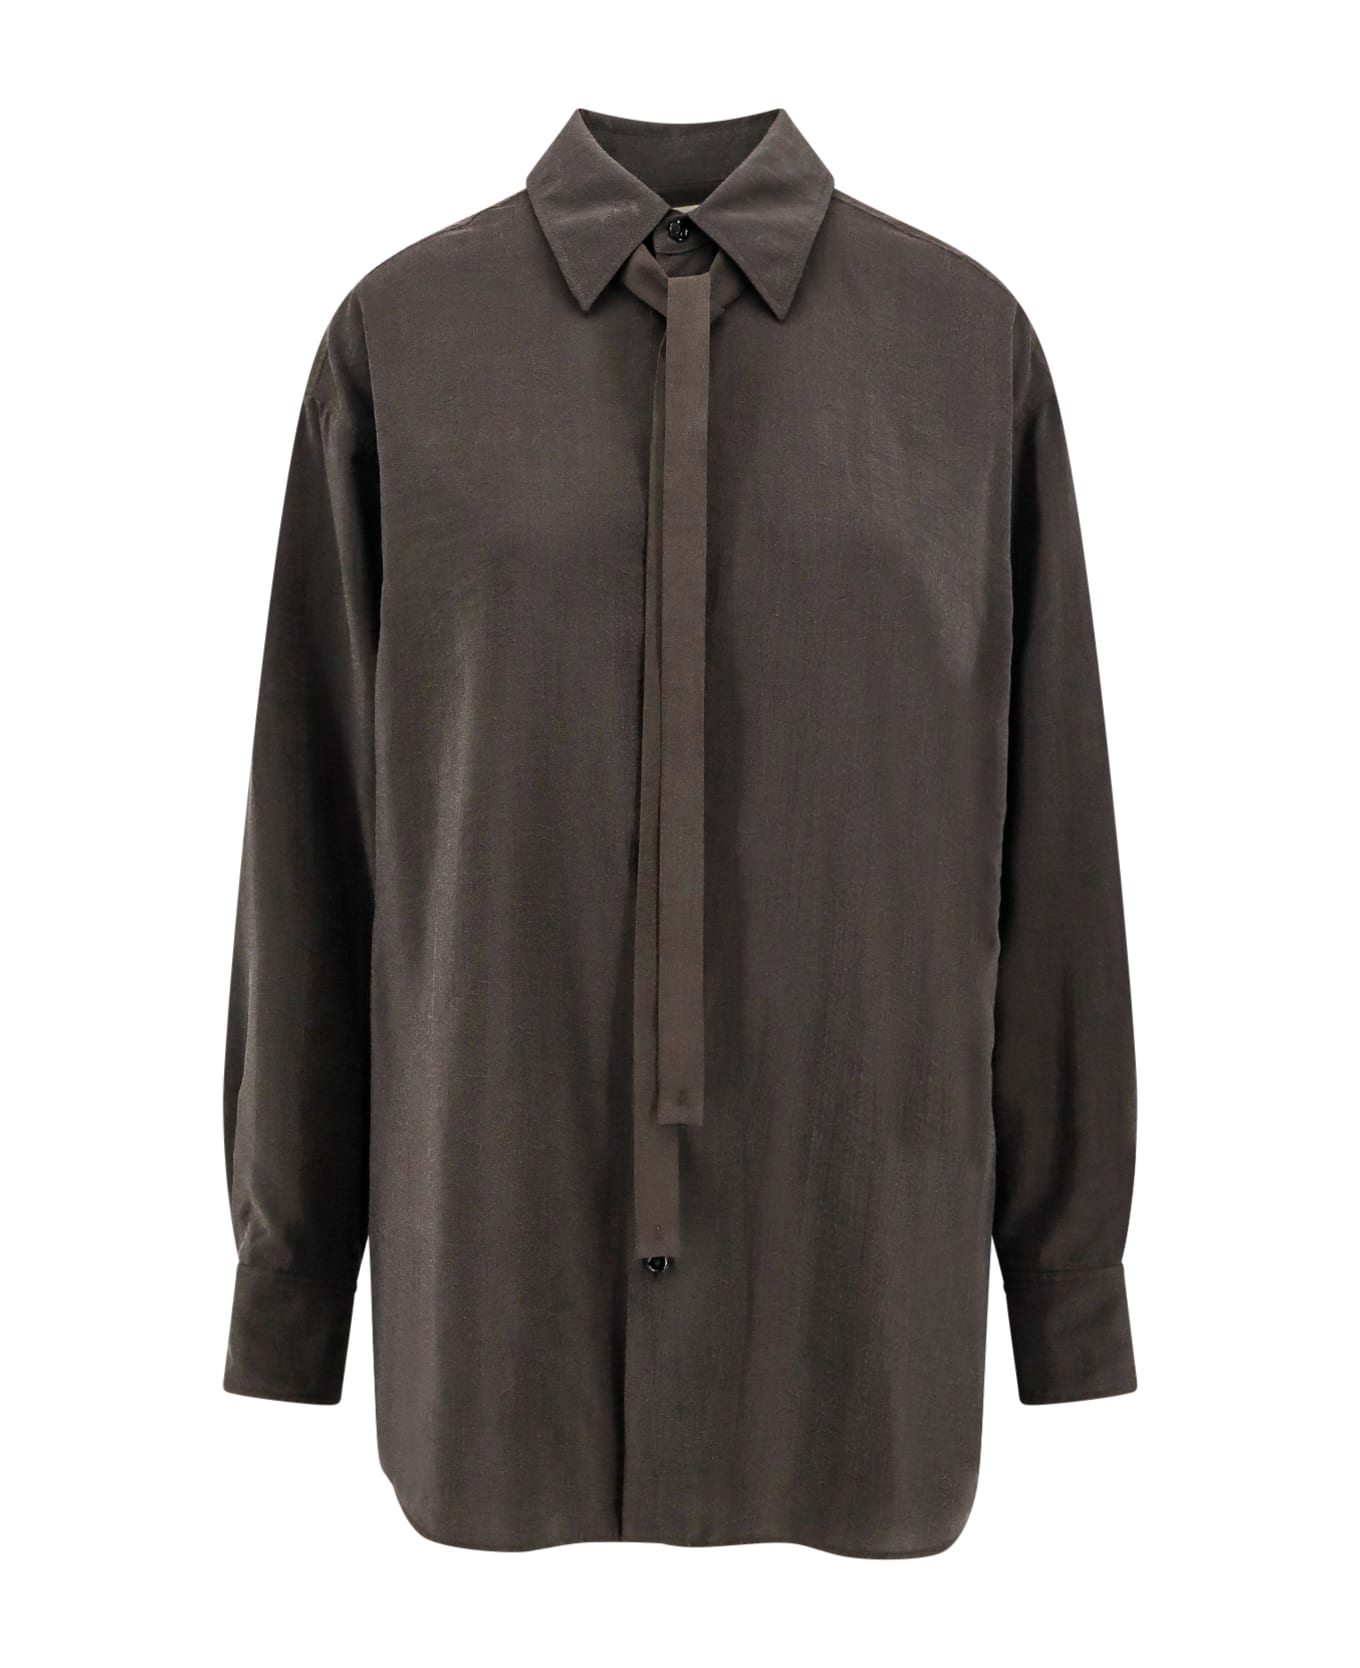 Lemaire Shirt - Brown シャツ